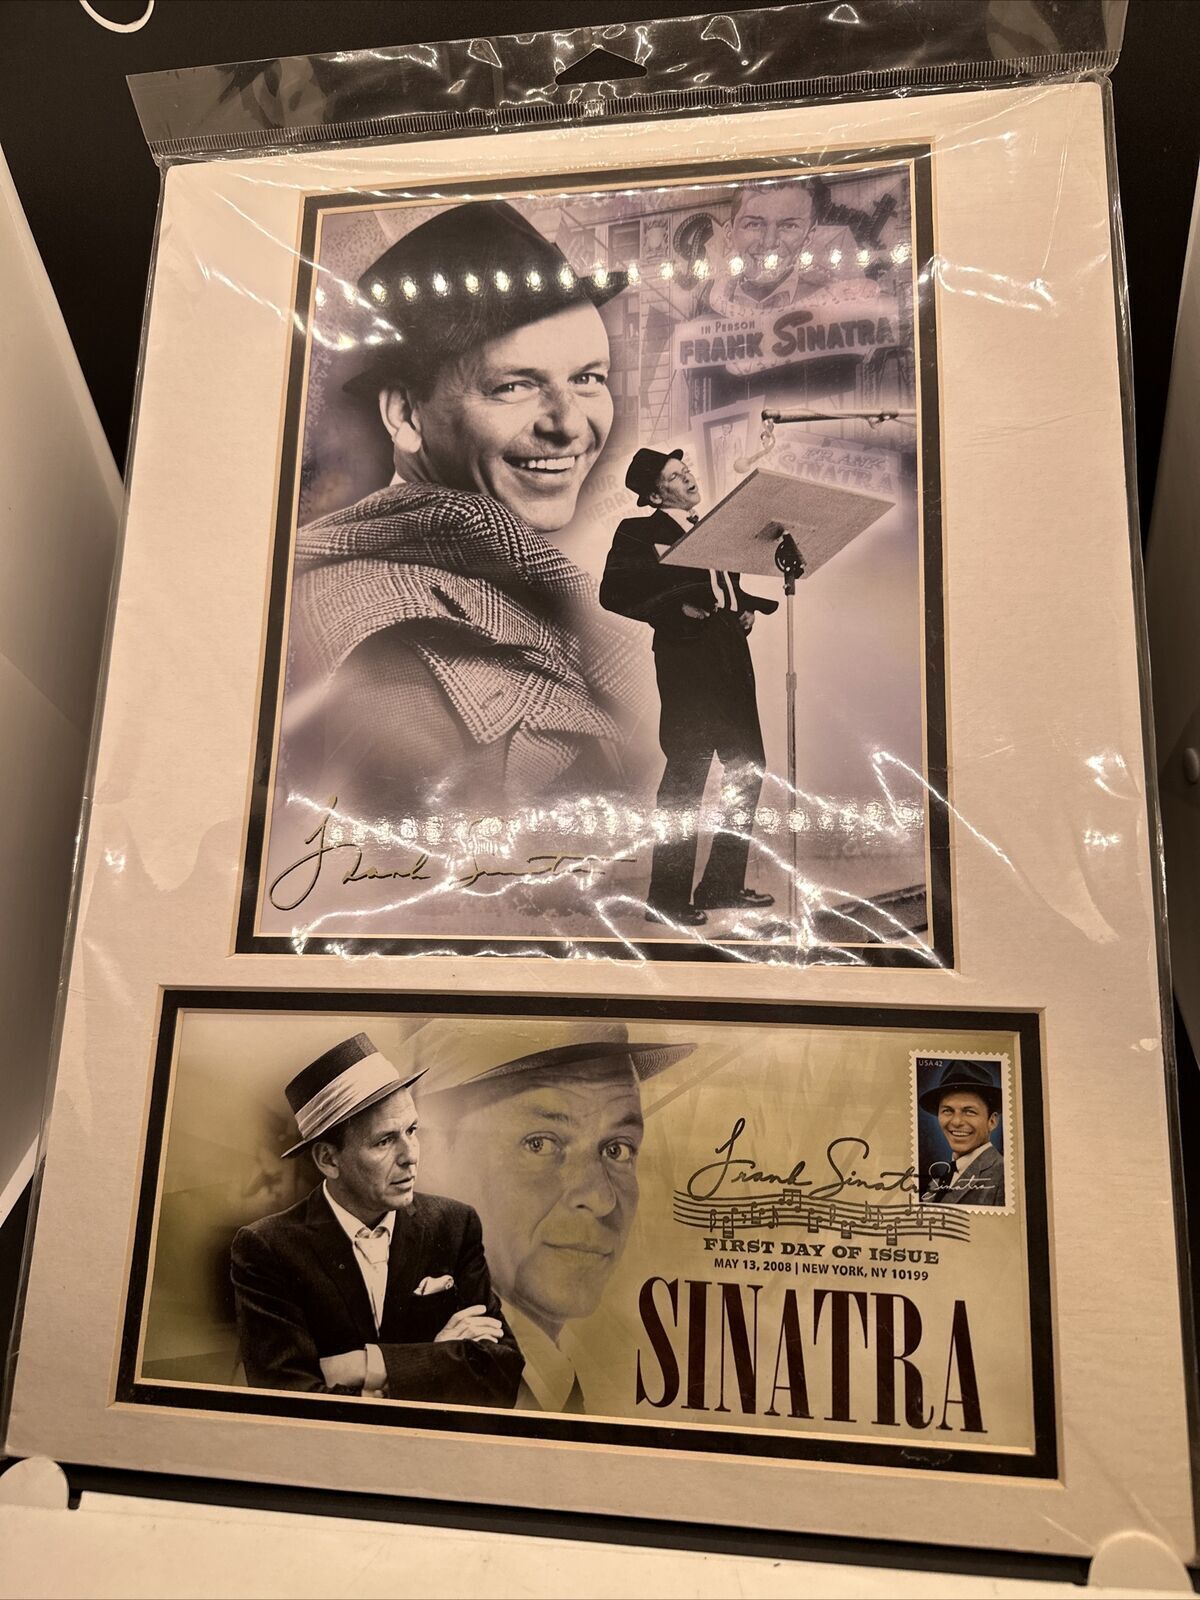 Frank Sinatra USPS First Day of Issue Stamp Poster Matted New Sealed Package